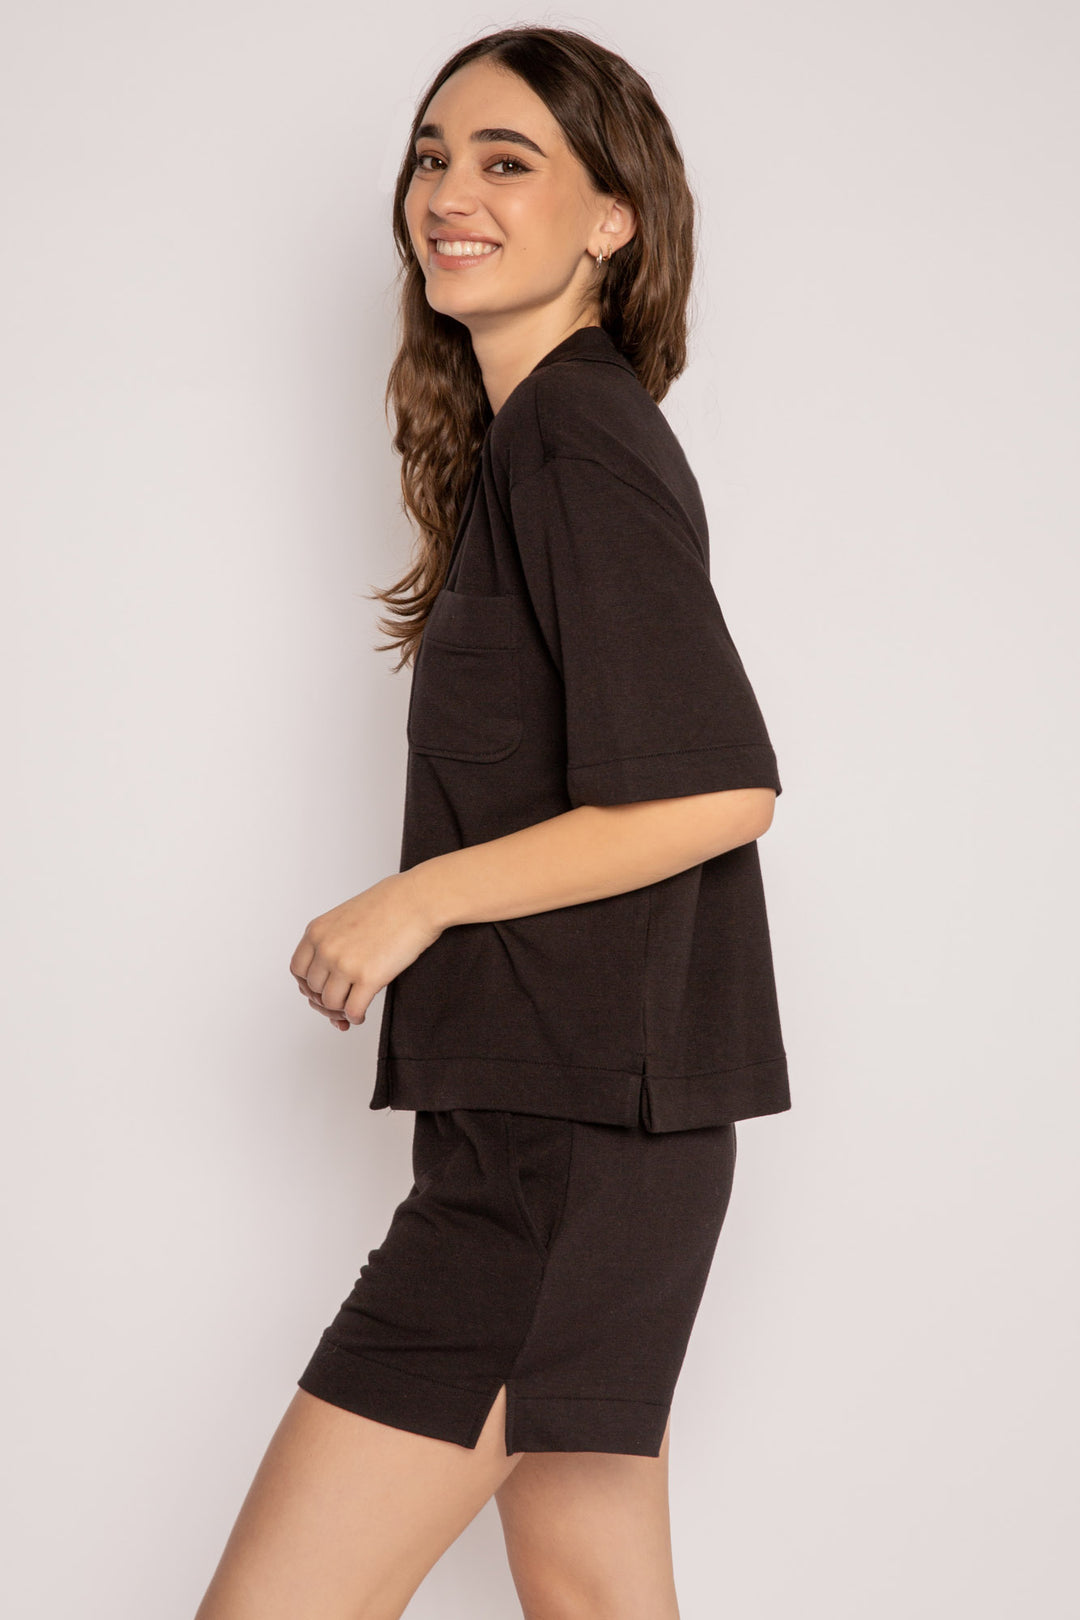 Black pajama set in a short sleeve button top & comfy pocket short in mini French terry. (7199527534692)